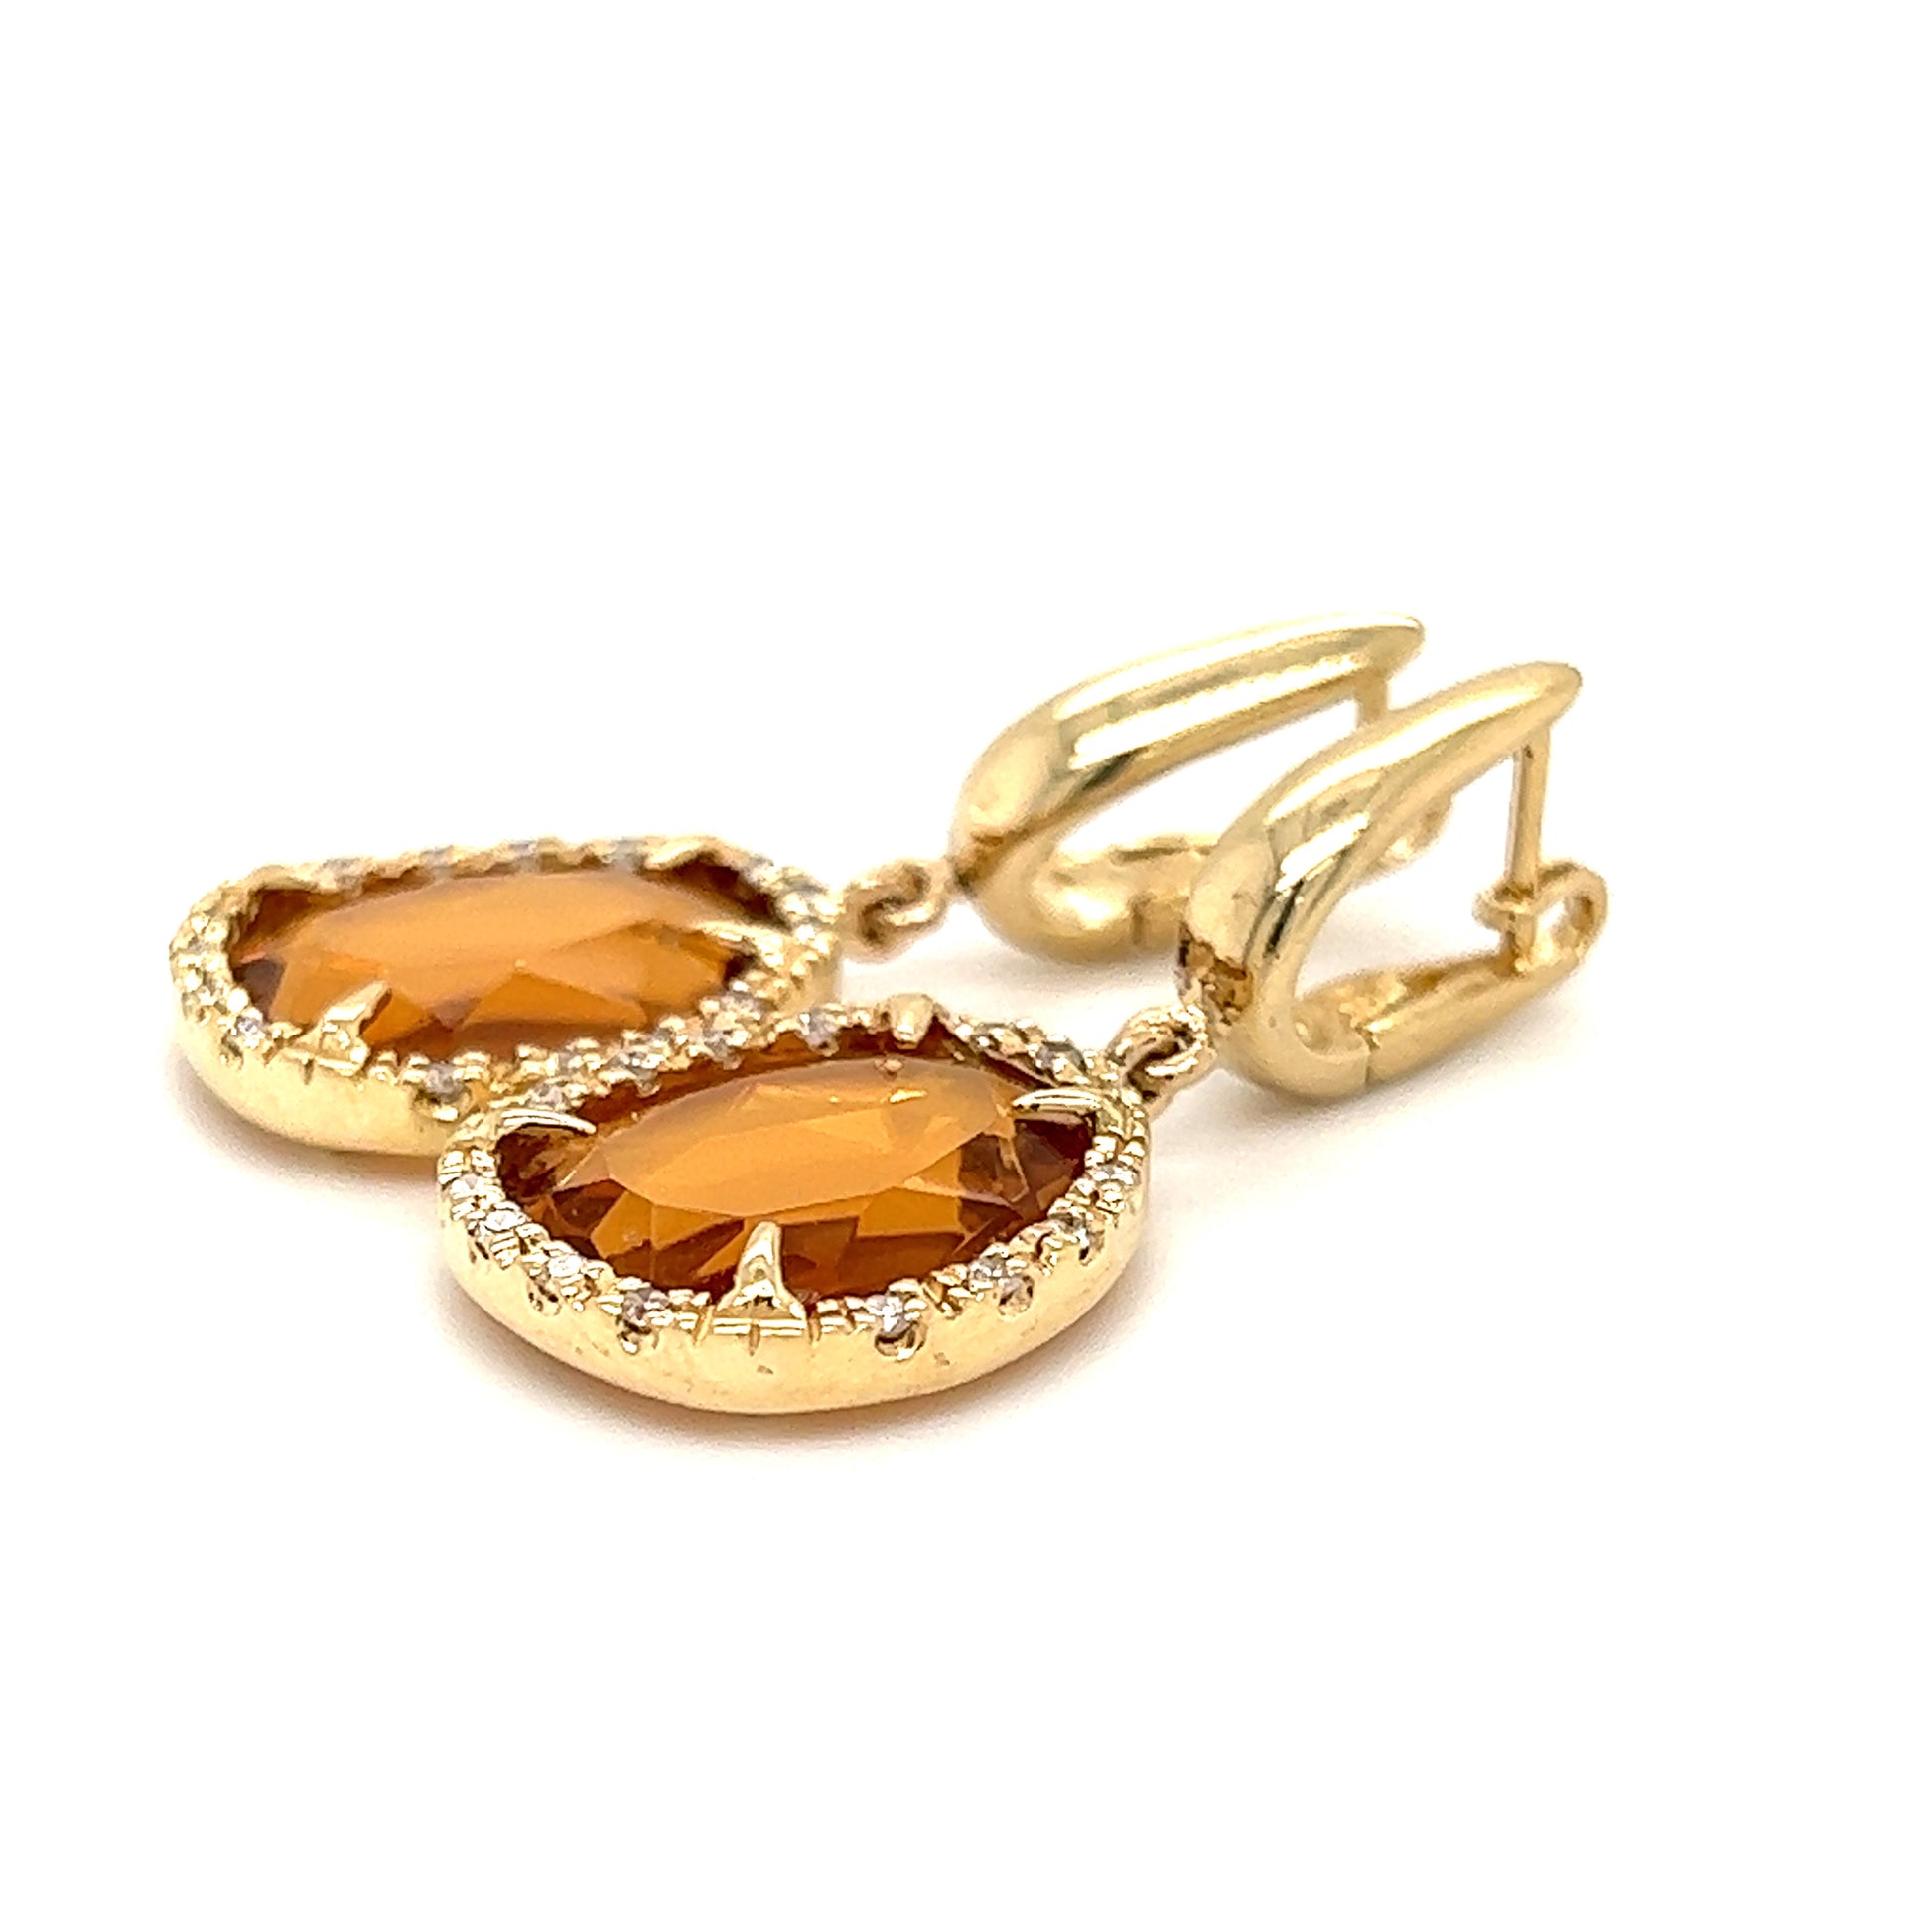 Citrine Dangle Earrings in 14K Yellow Gold Right Side View